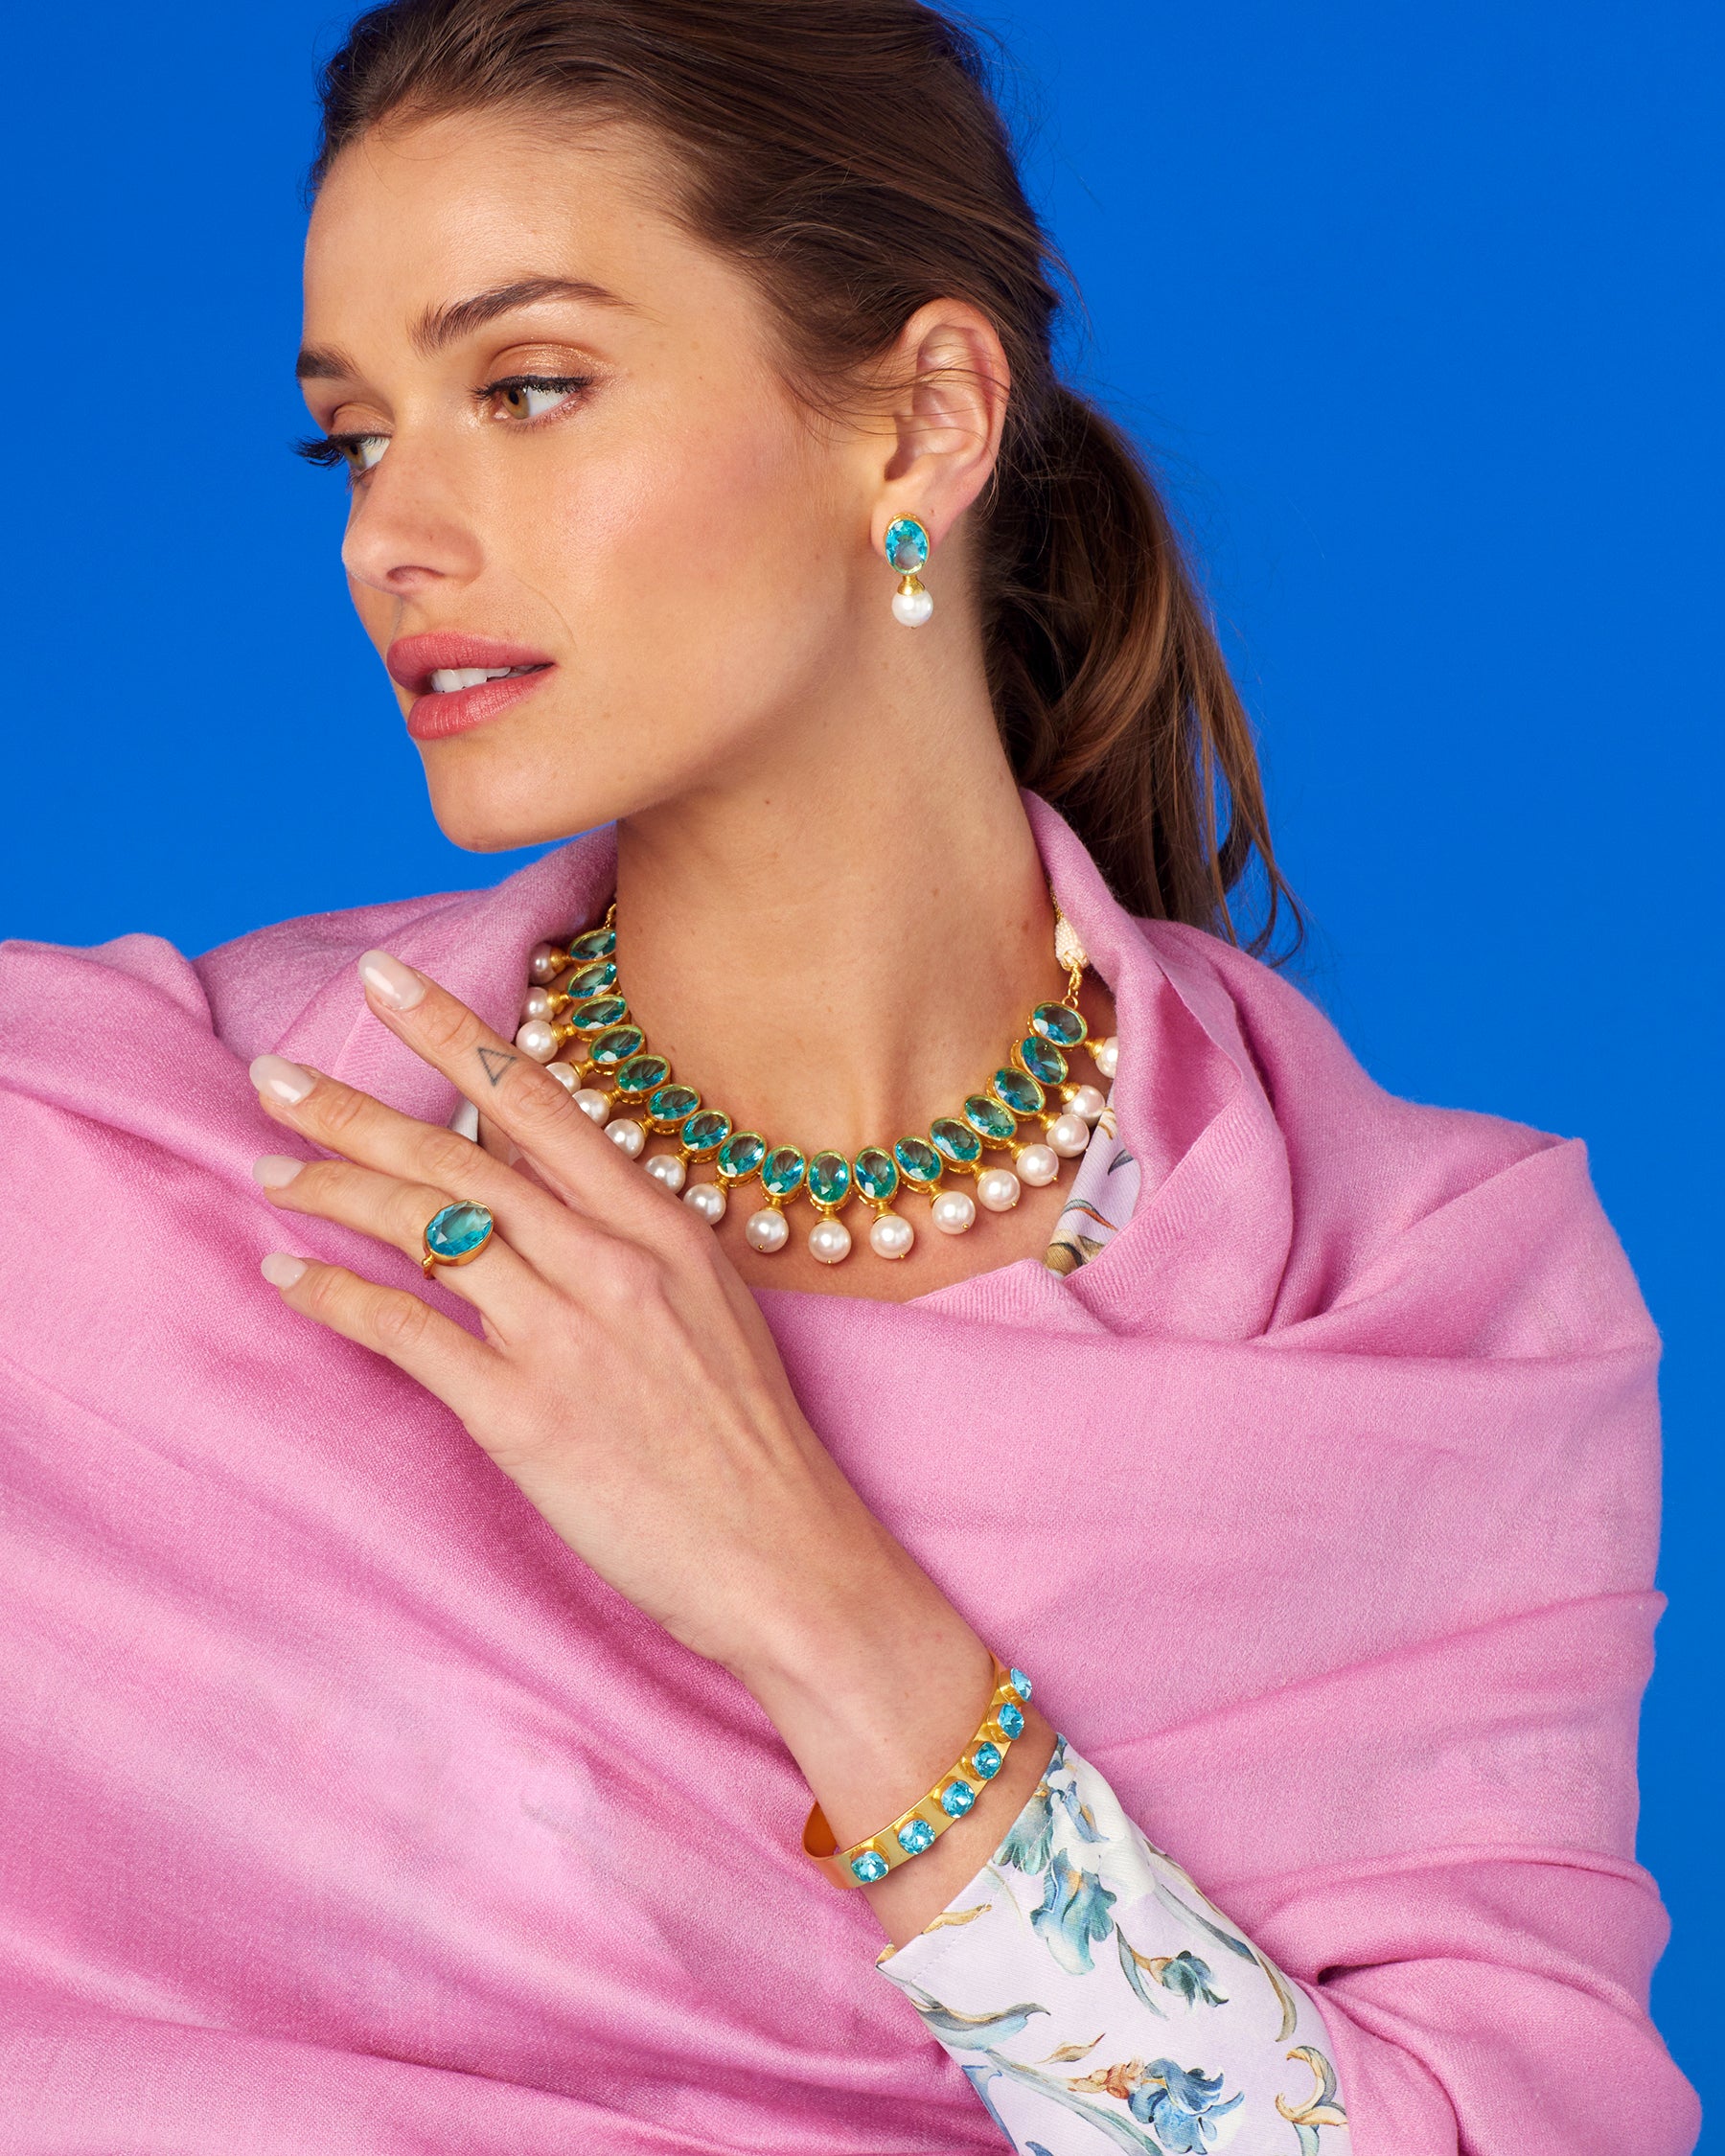 Finley Cuff Bracelet in Clear Turquoise-Worn with the Pashmina Shawl and Gia Aquamarine Crystal Necklace and Earrings